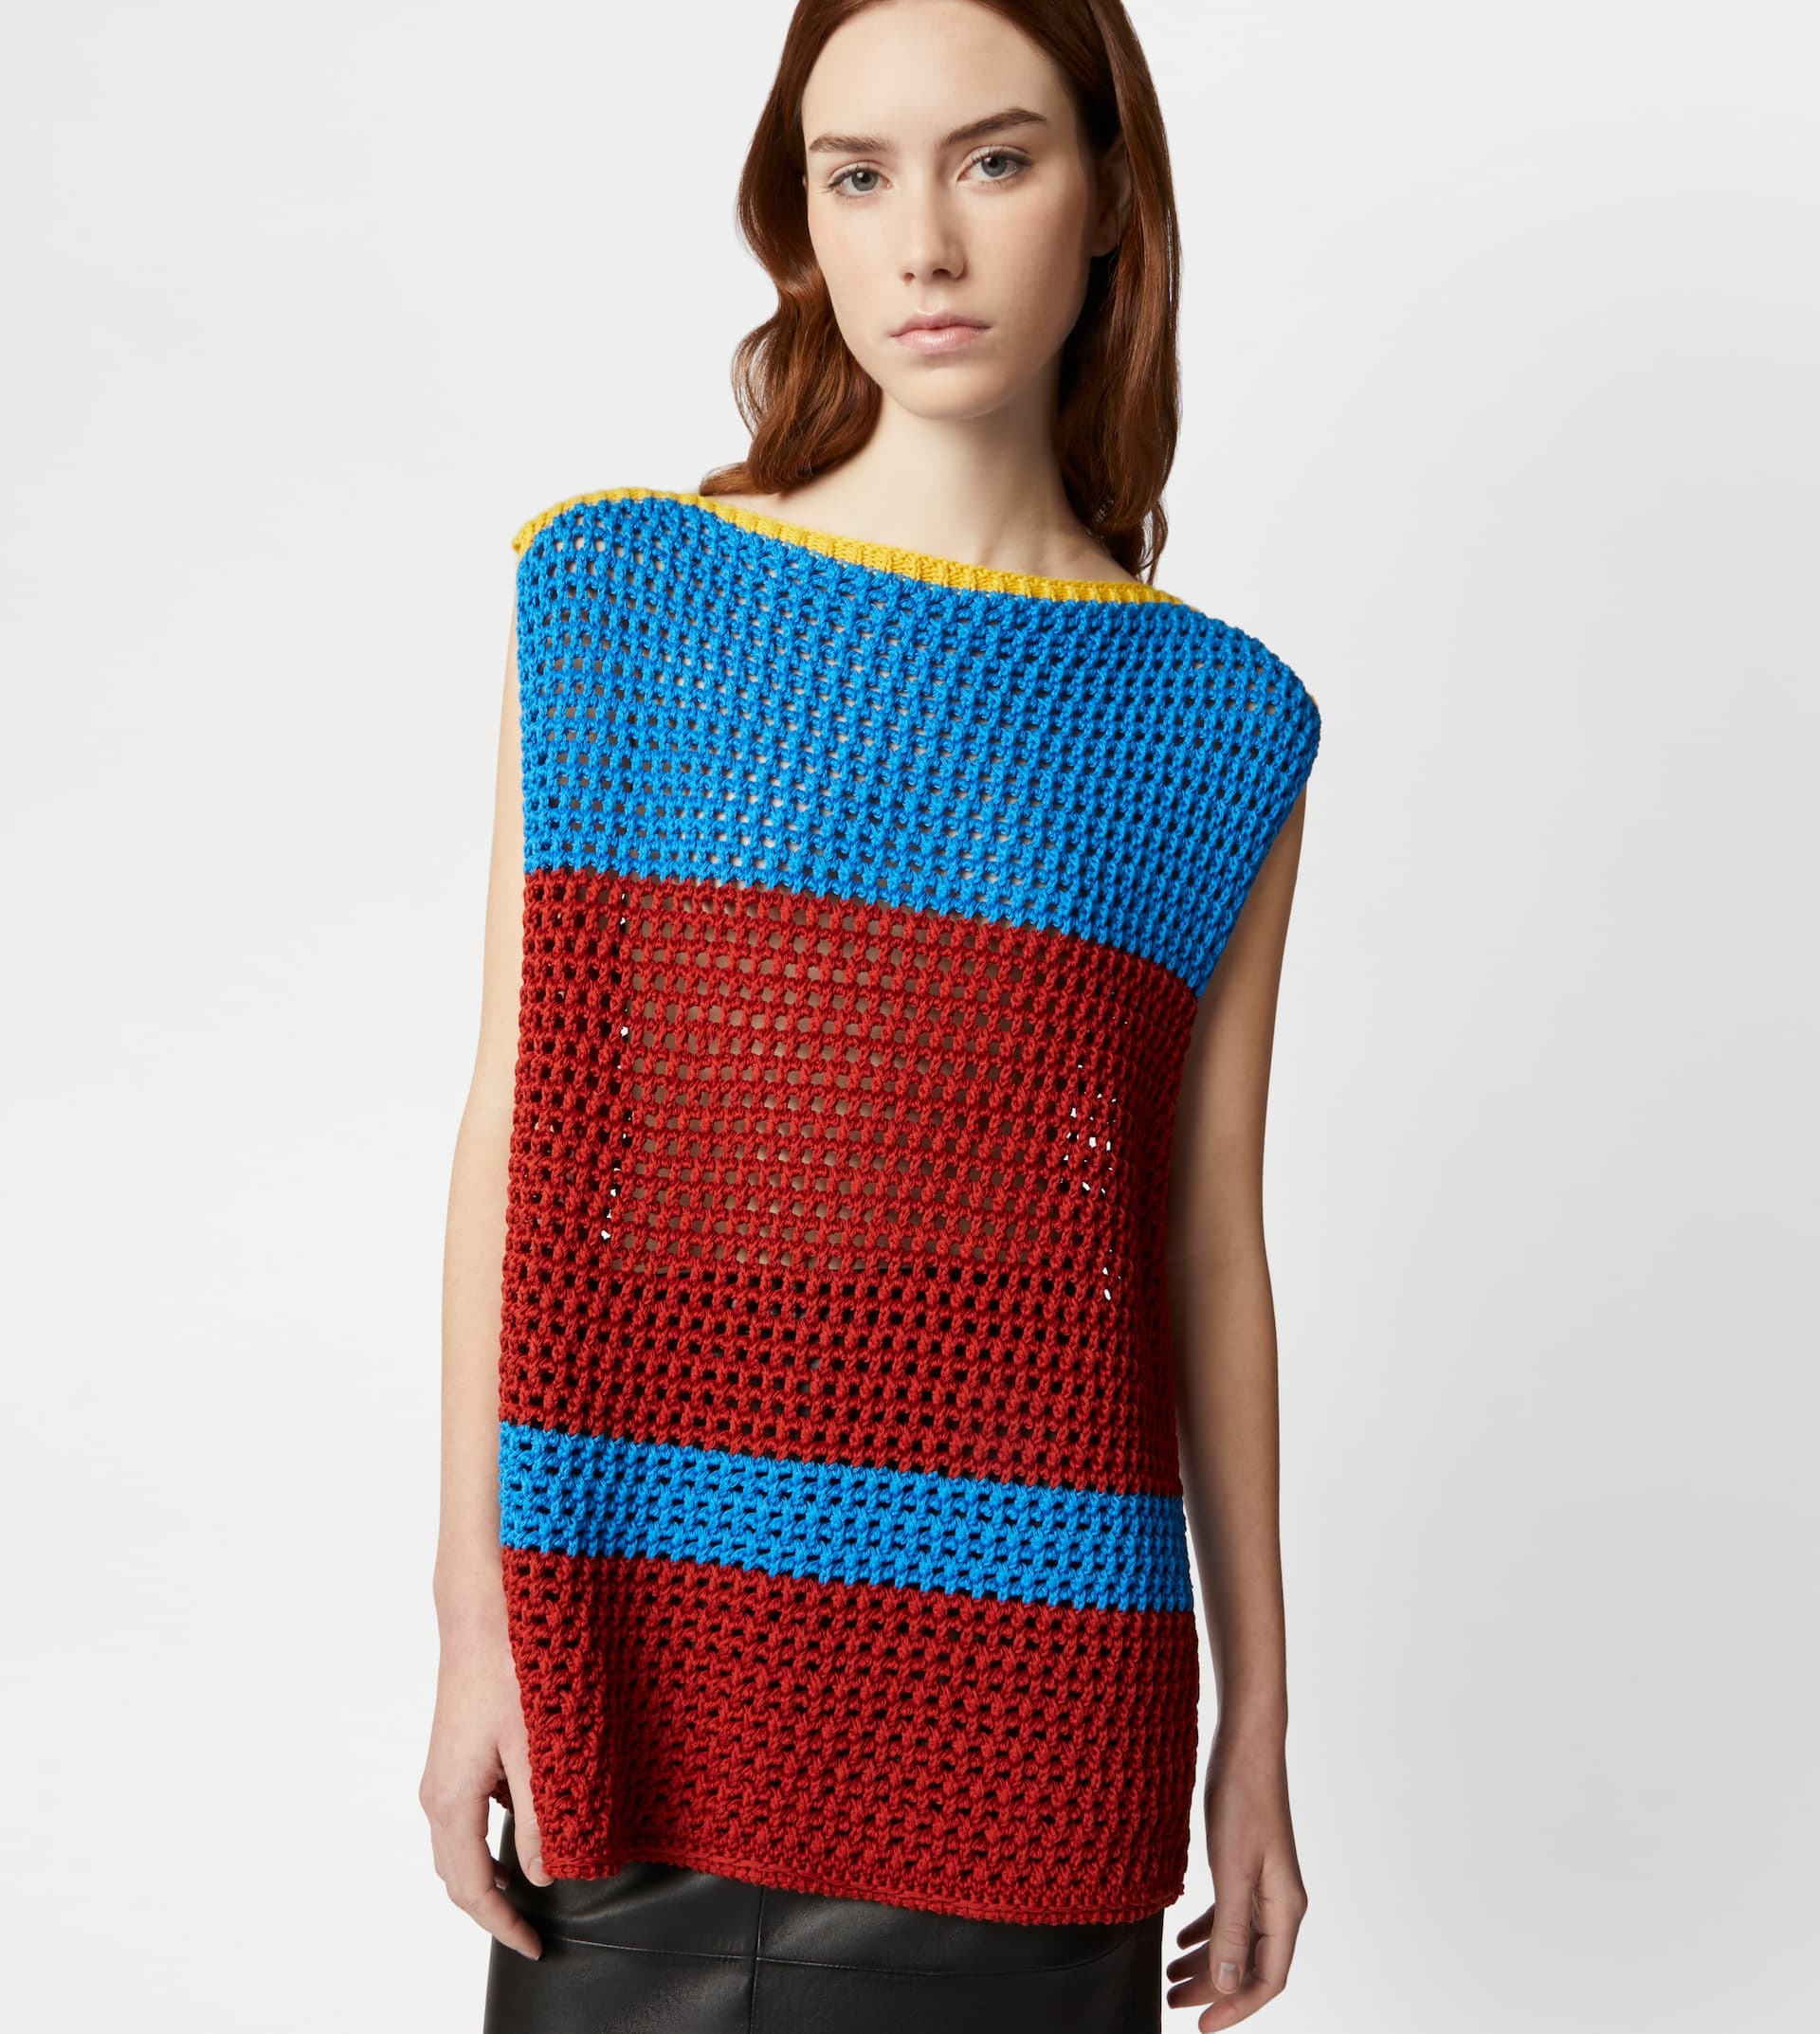 TOP IN COTTON KNIT - RED, LIGHT BLUE, YELLOW - 7